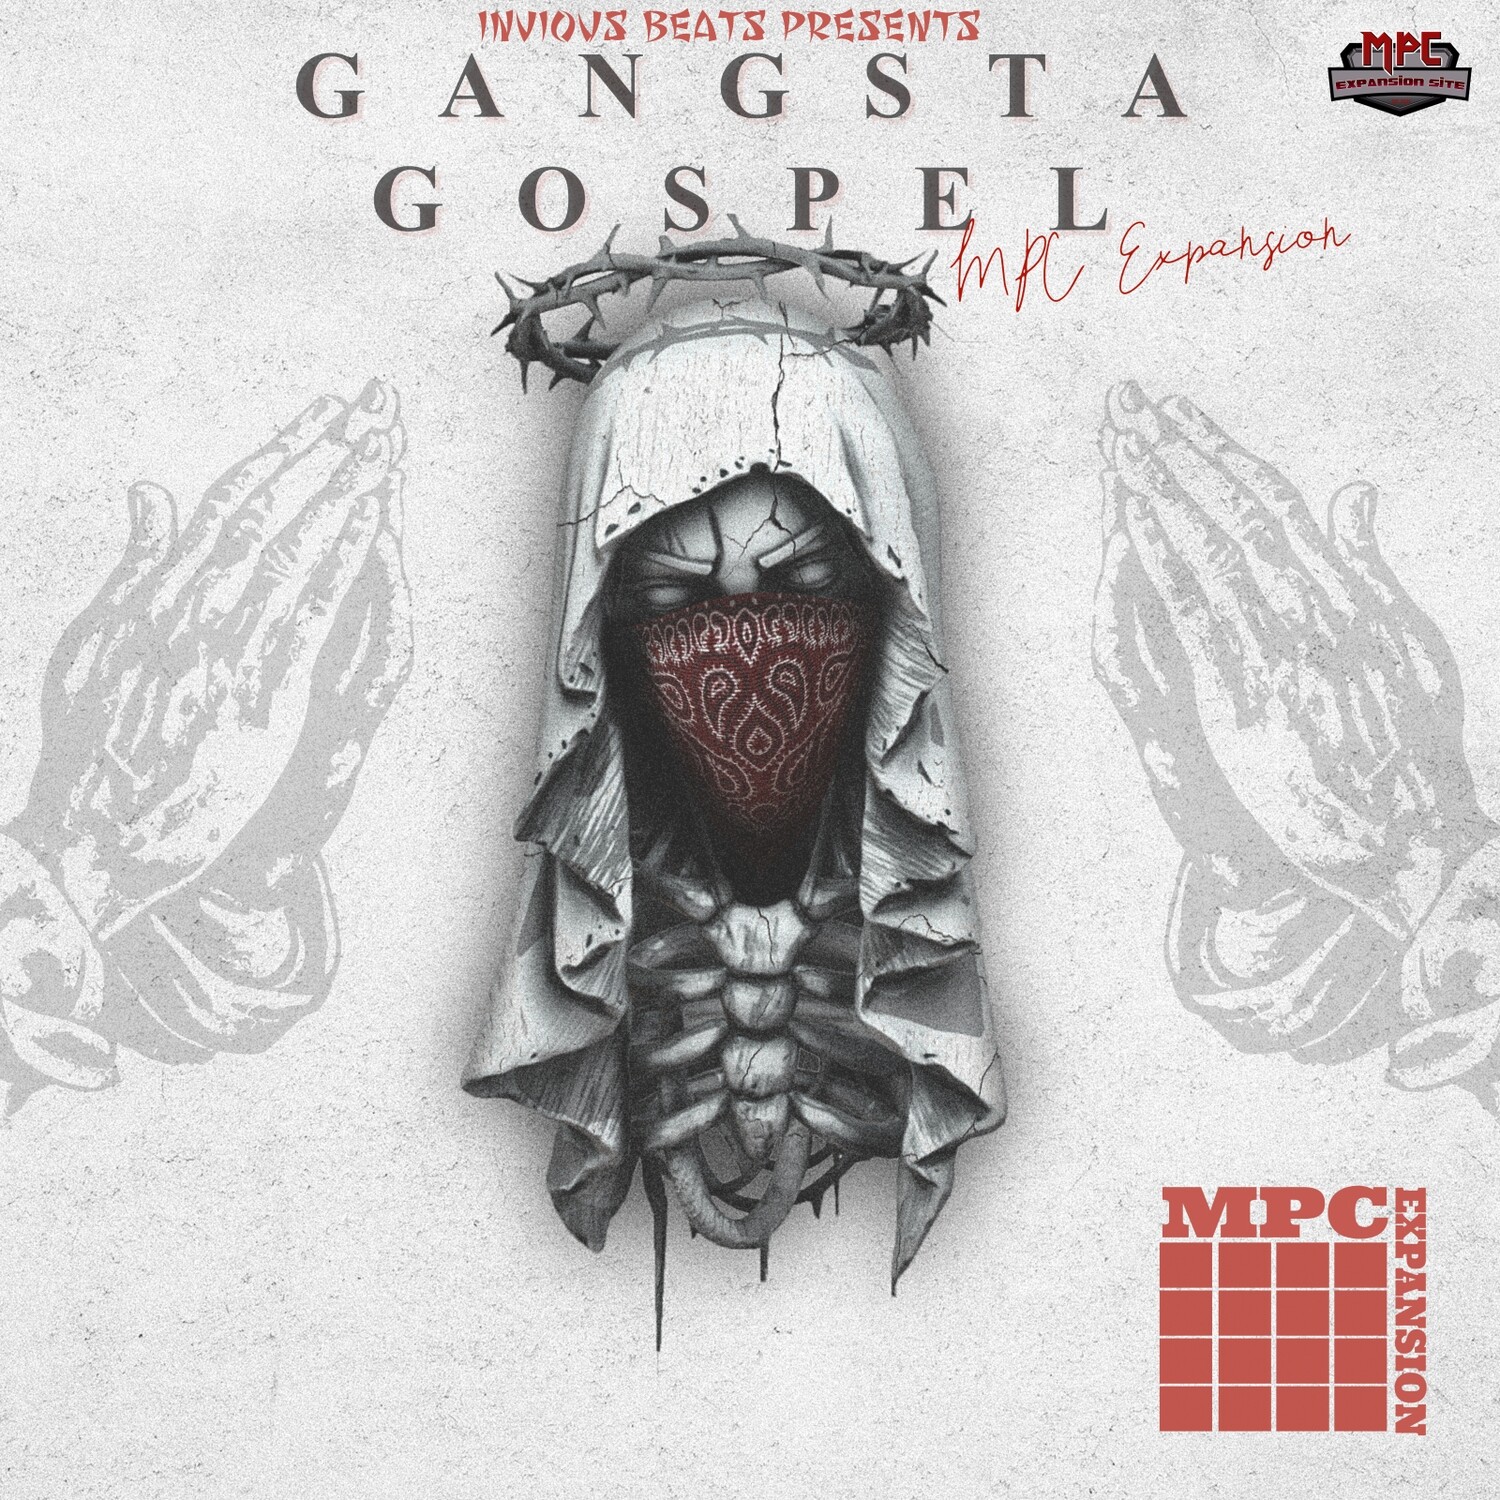 MPC EXPANSION 'GANGSTA GOSPEL' by INVIOUS